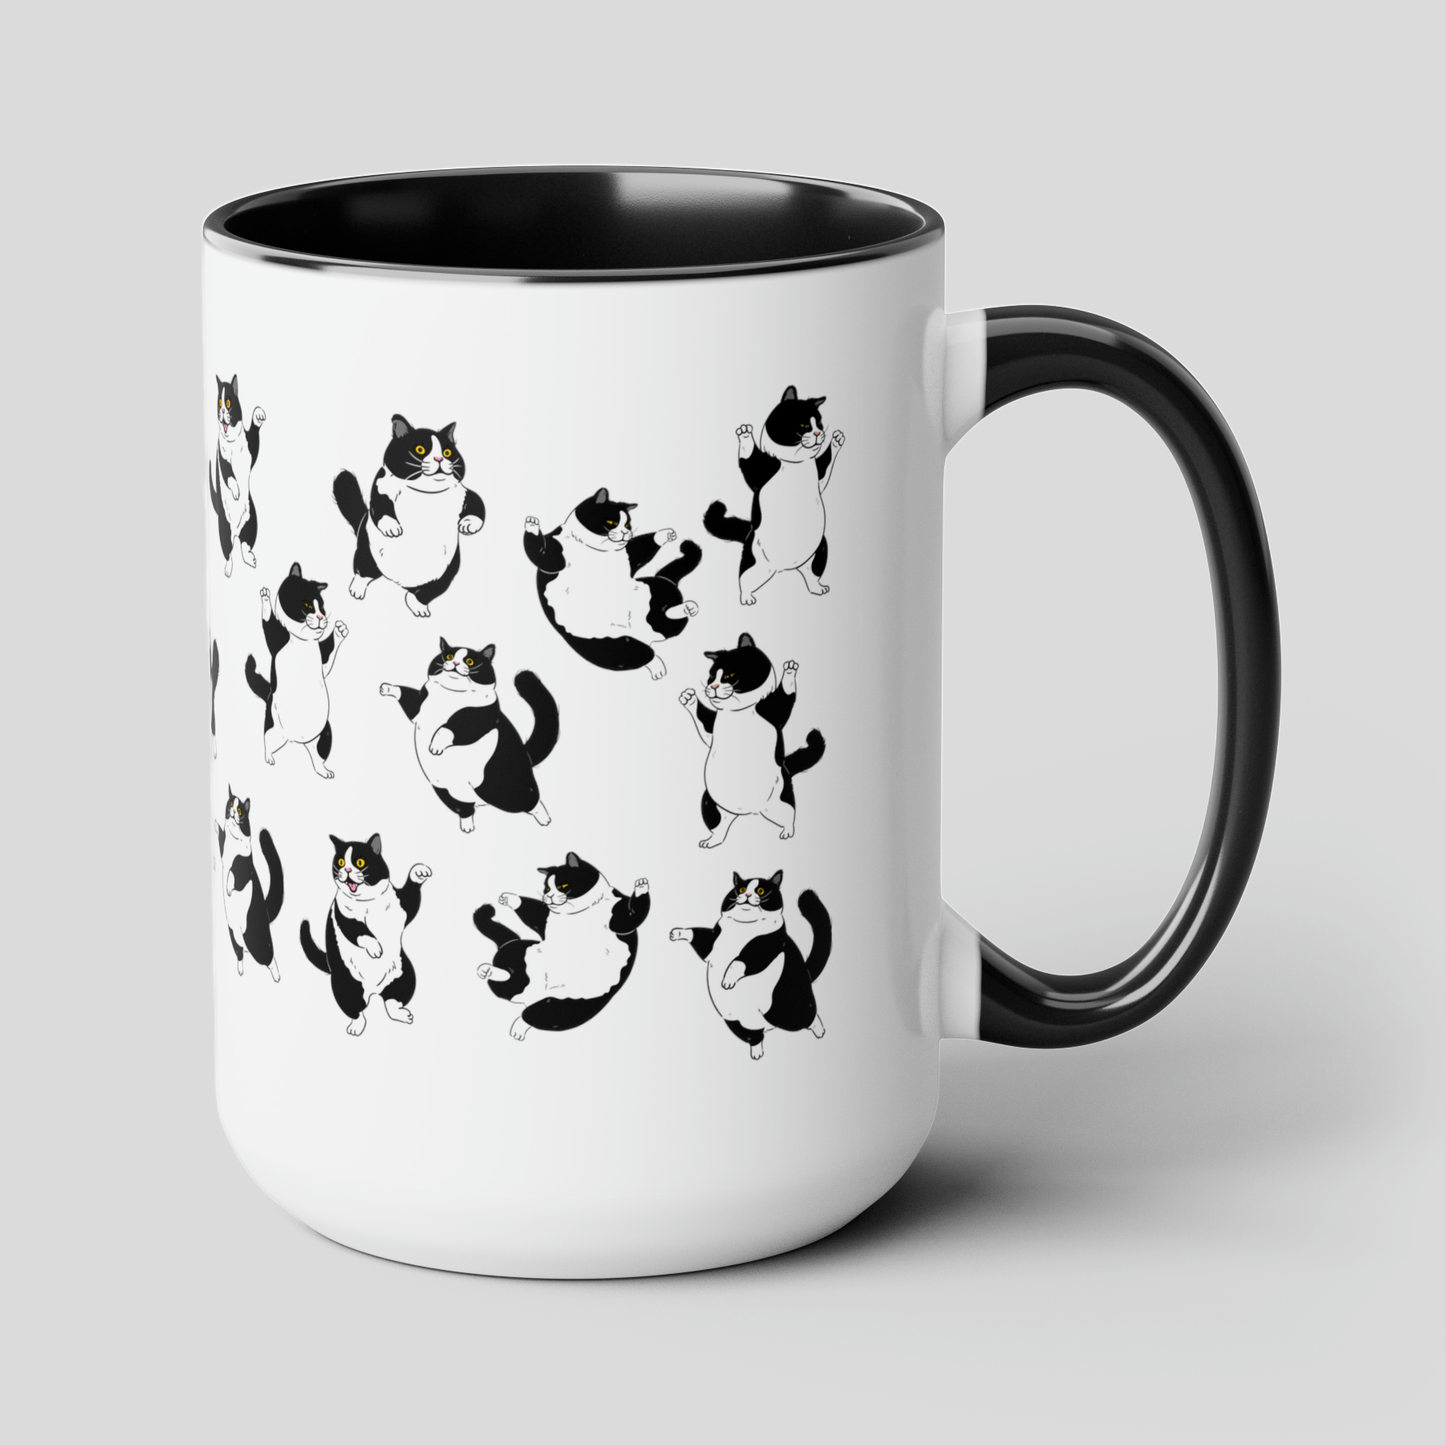 Tuxedo Cat 15oz white with black accent funny large coffee mug gift for her him feline cat lover furparent waveywares wavey wares wavywares wavy wares cover